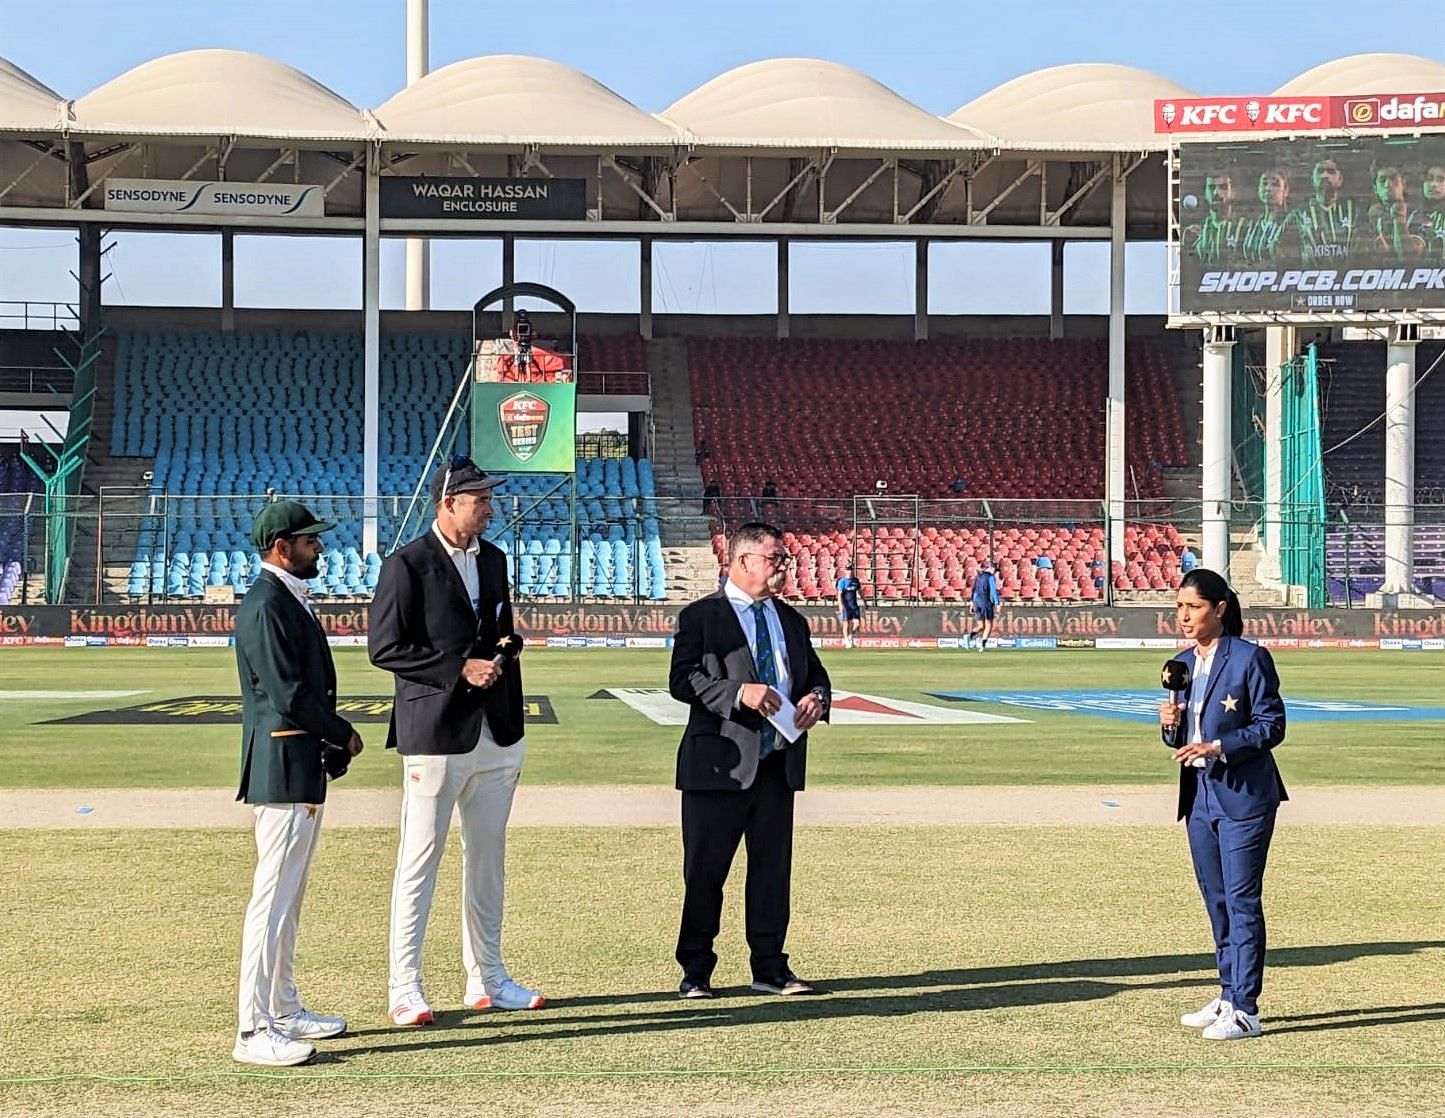 Babar Azam and Kane Williamson standing for the toss. (Credits: Twitter)